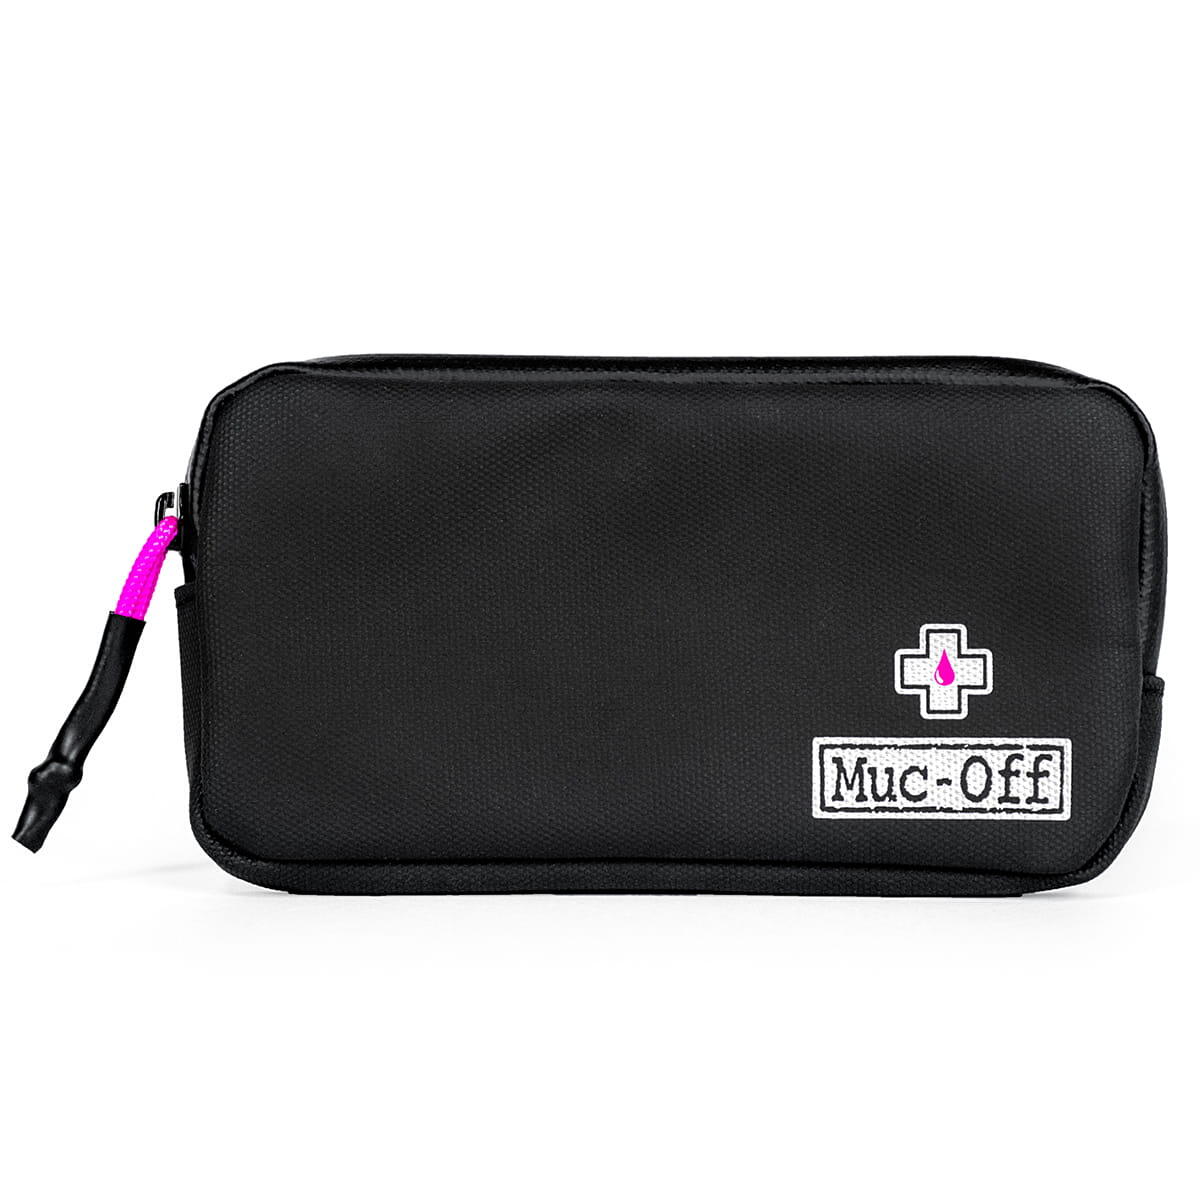 Muc-Off Essentials Case Water Resistant Cycling Pocket Storage 1/5